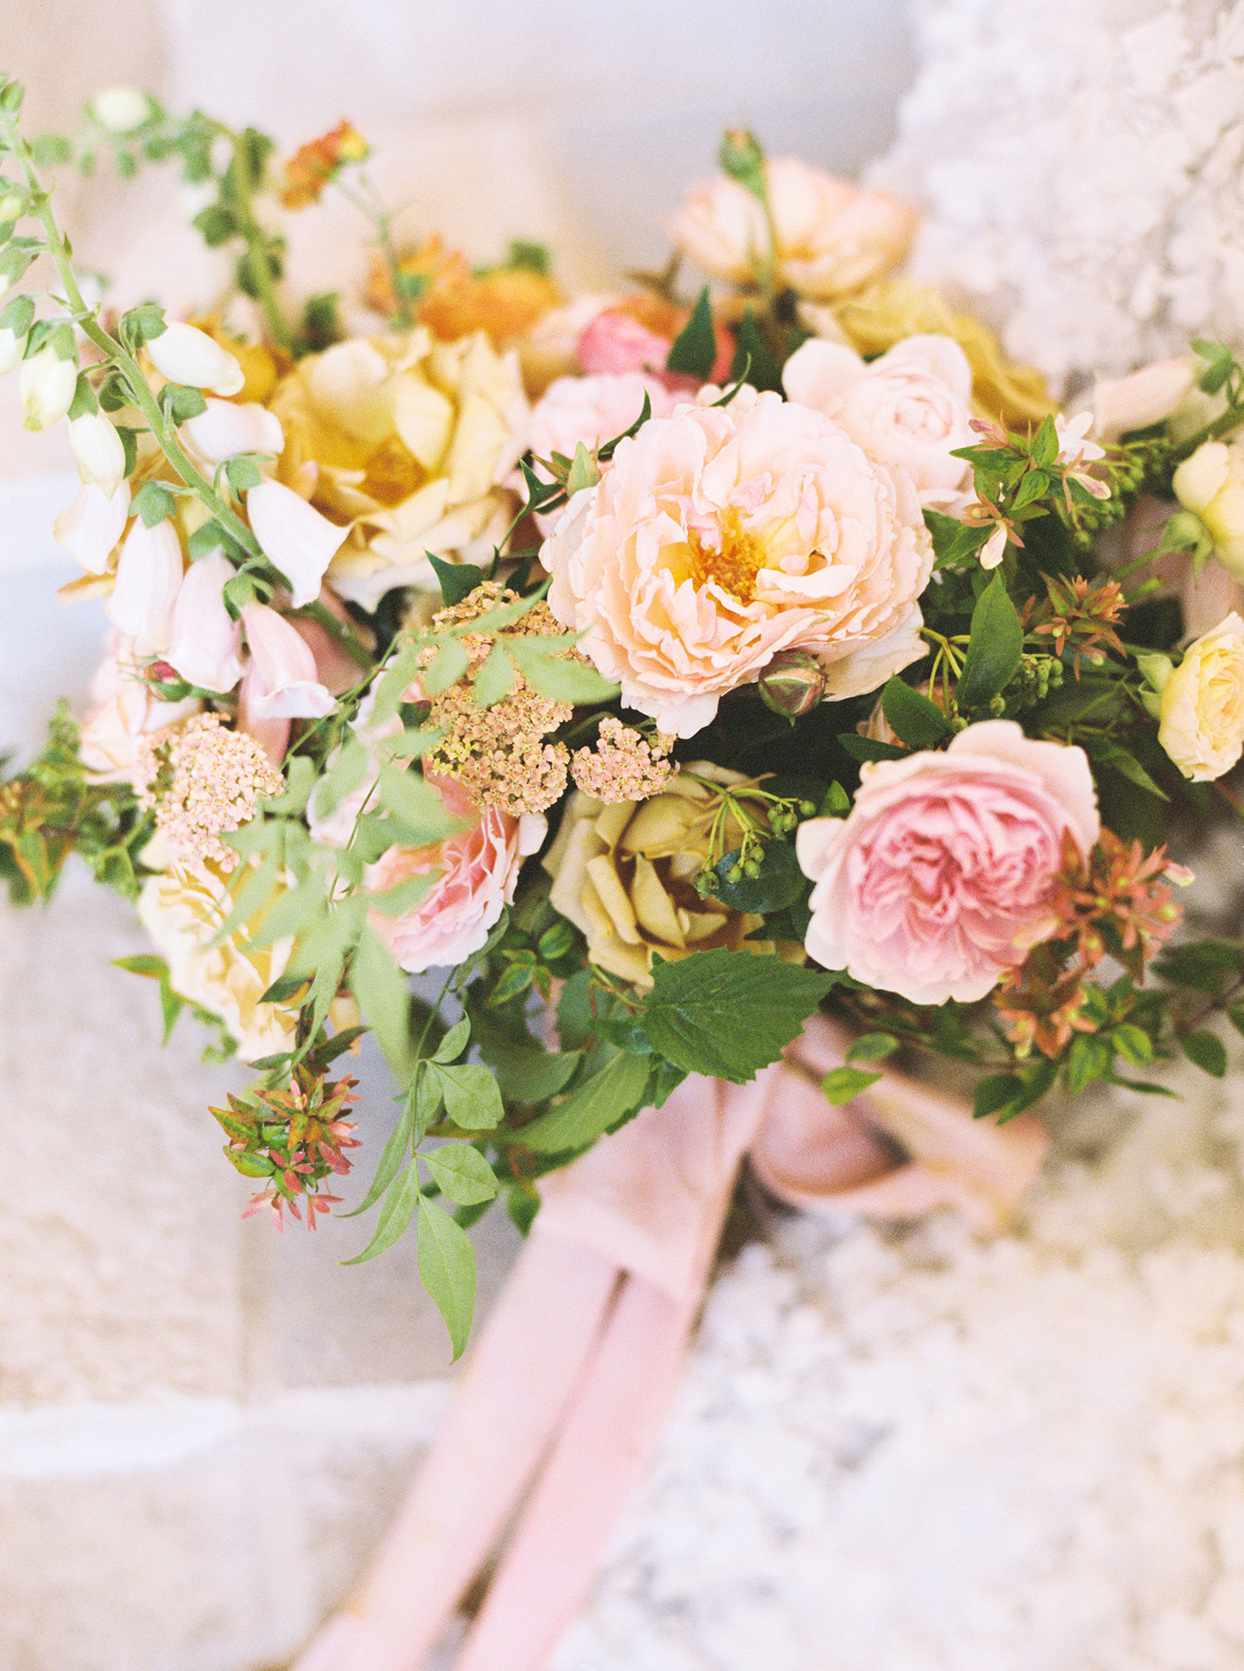 Wedding bouquet of ranunculus blossoms, dusty peach lisianthus blooms, and garden roses in hues of light gold and sand